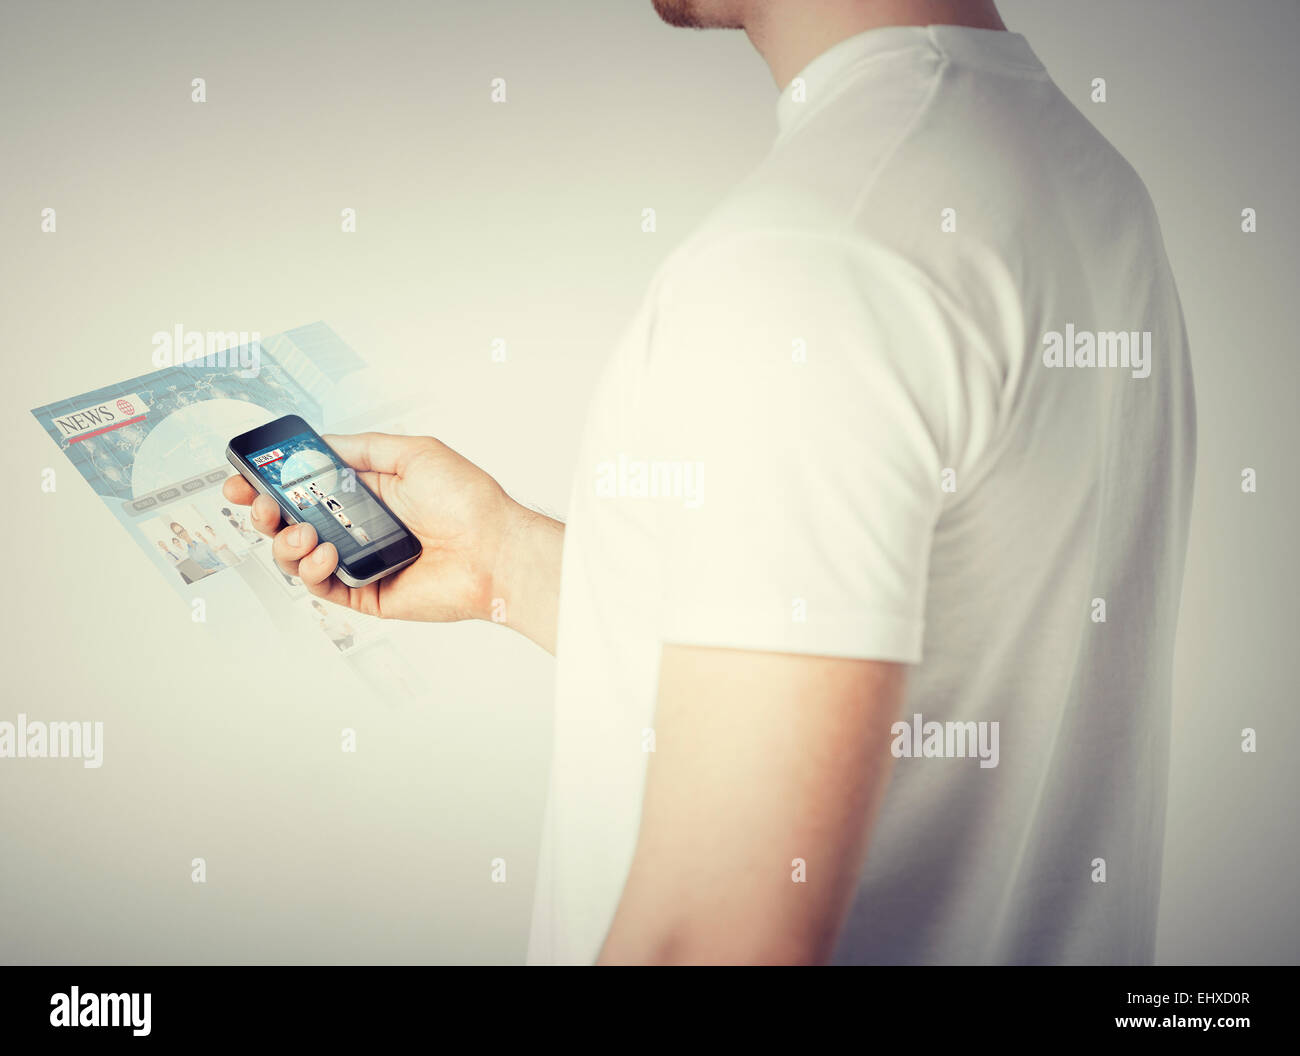 man with smartphone reading news Stock Photo